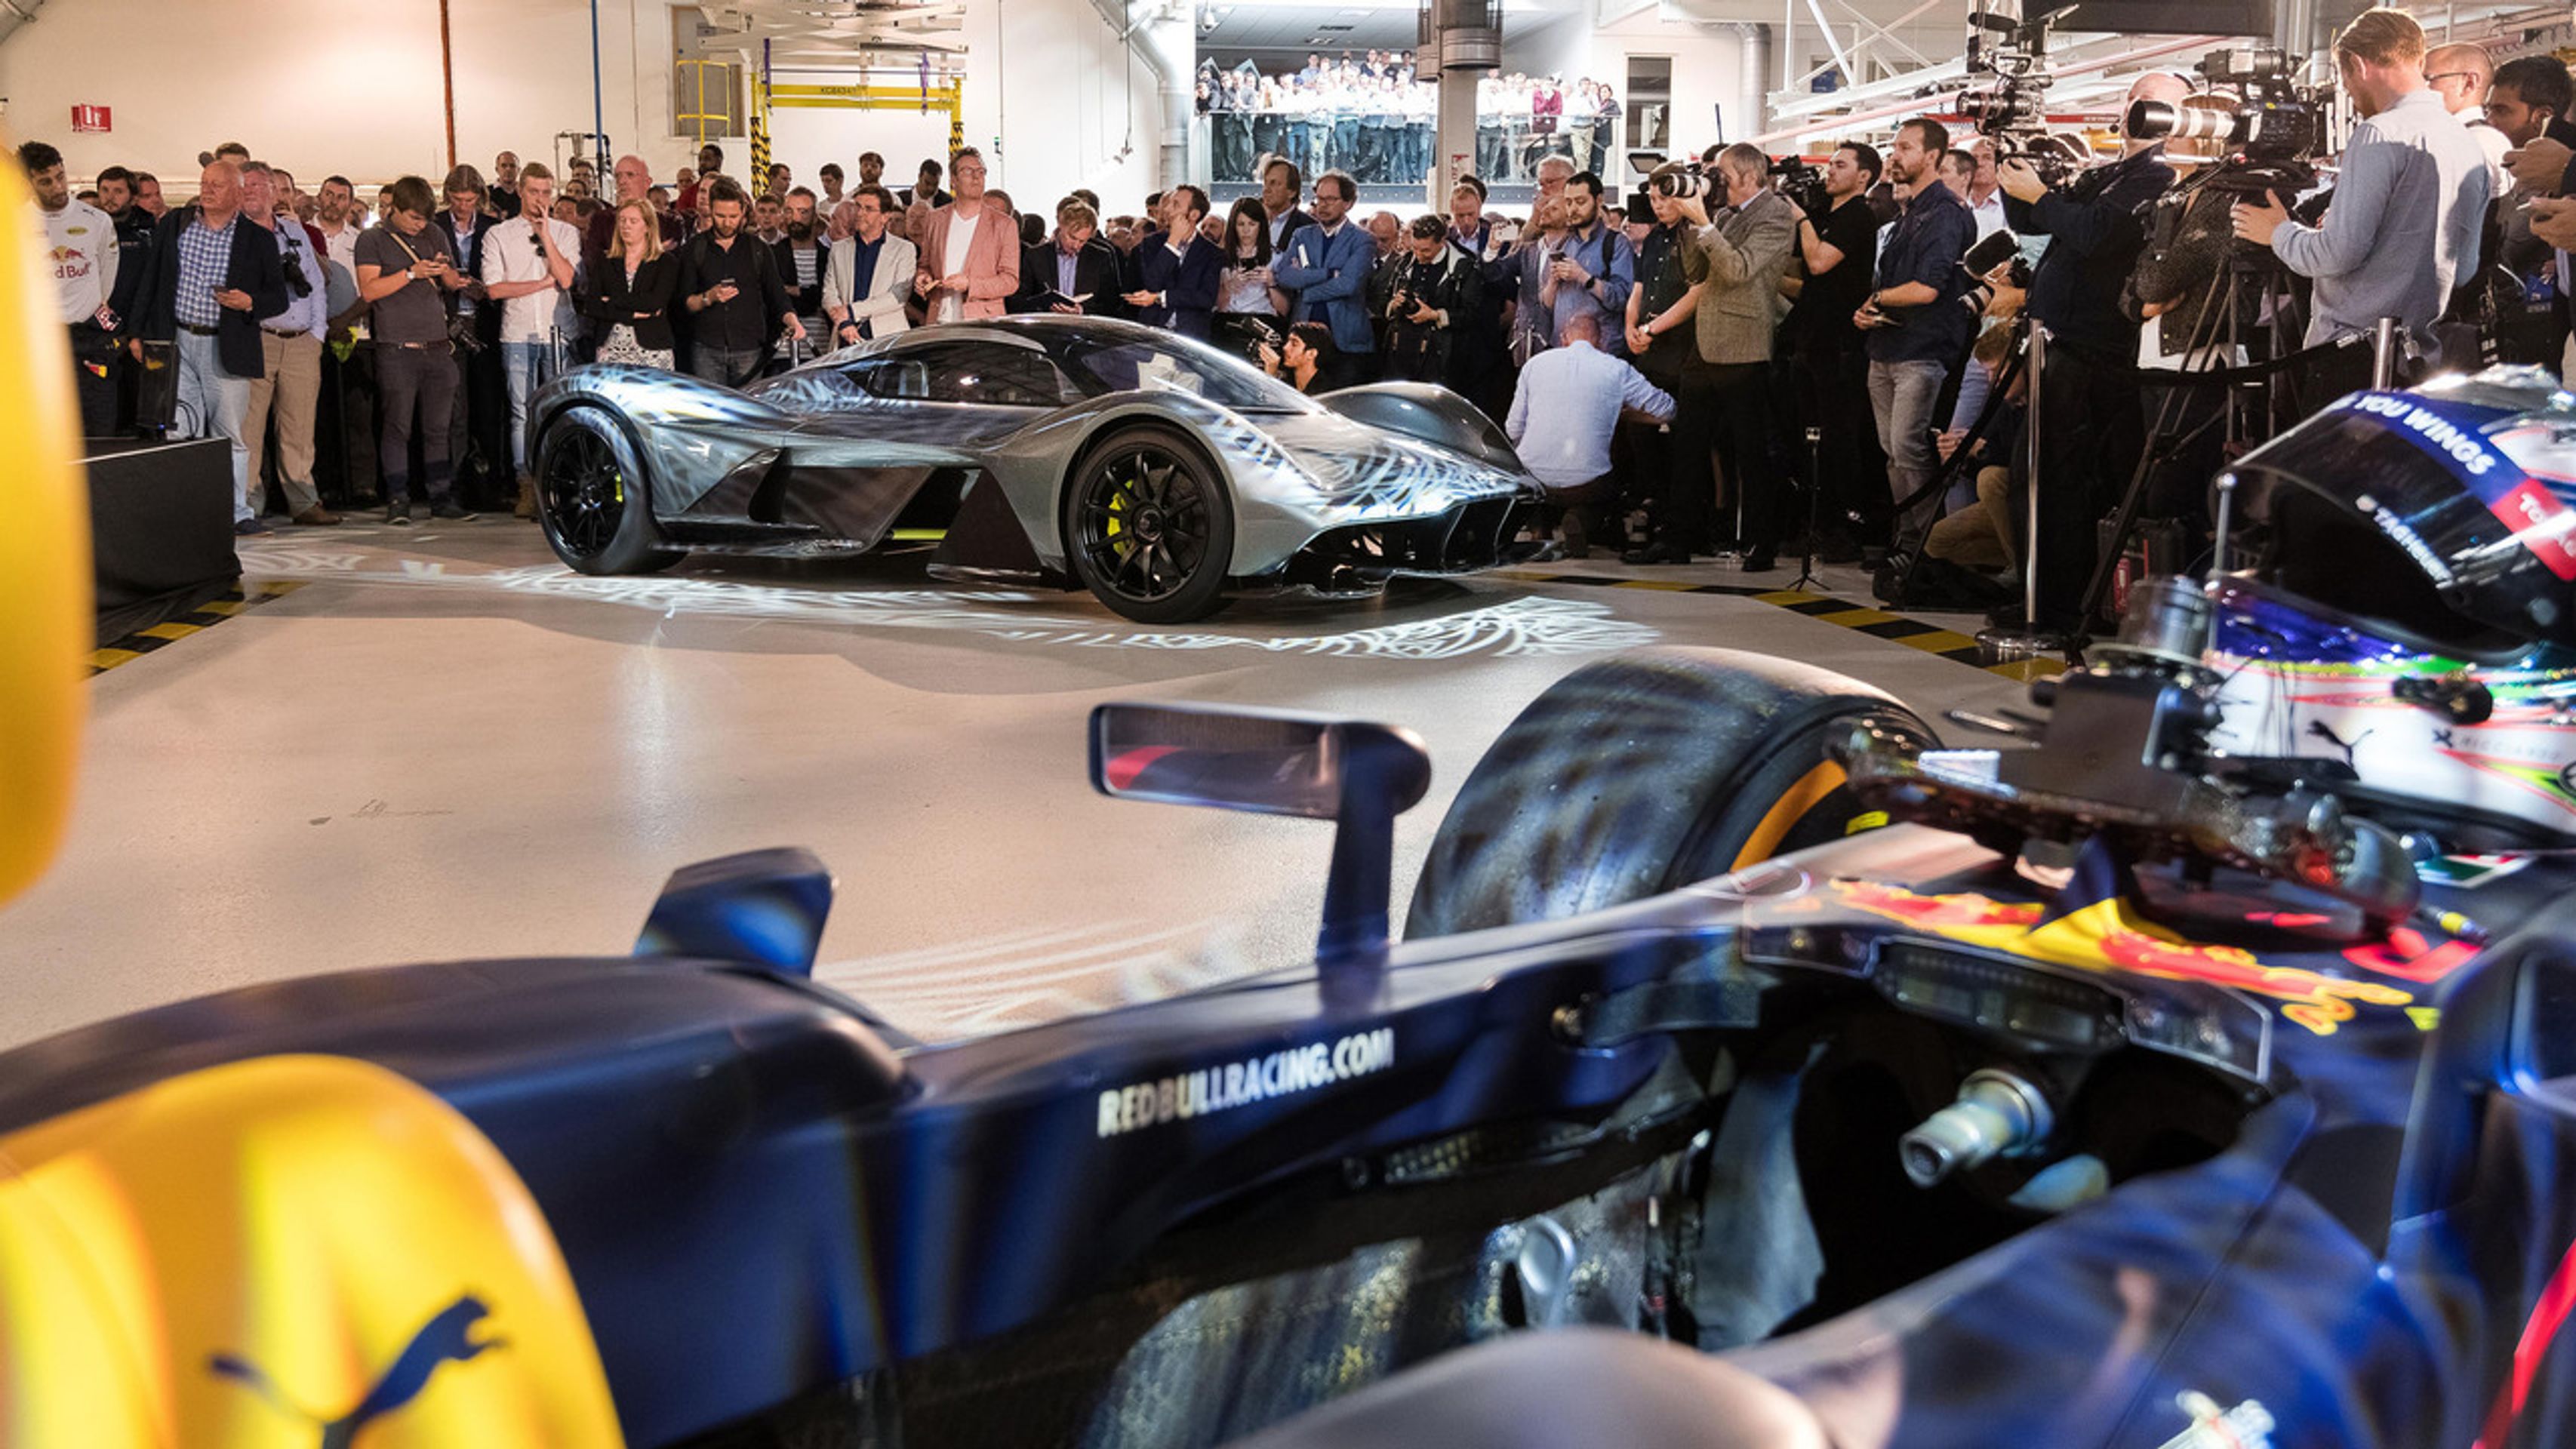 AM-RB 001 - 12 - GALERIE: AM-RB 001 (3/7)